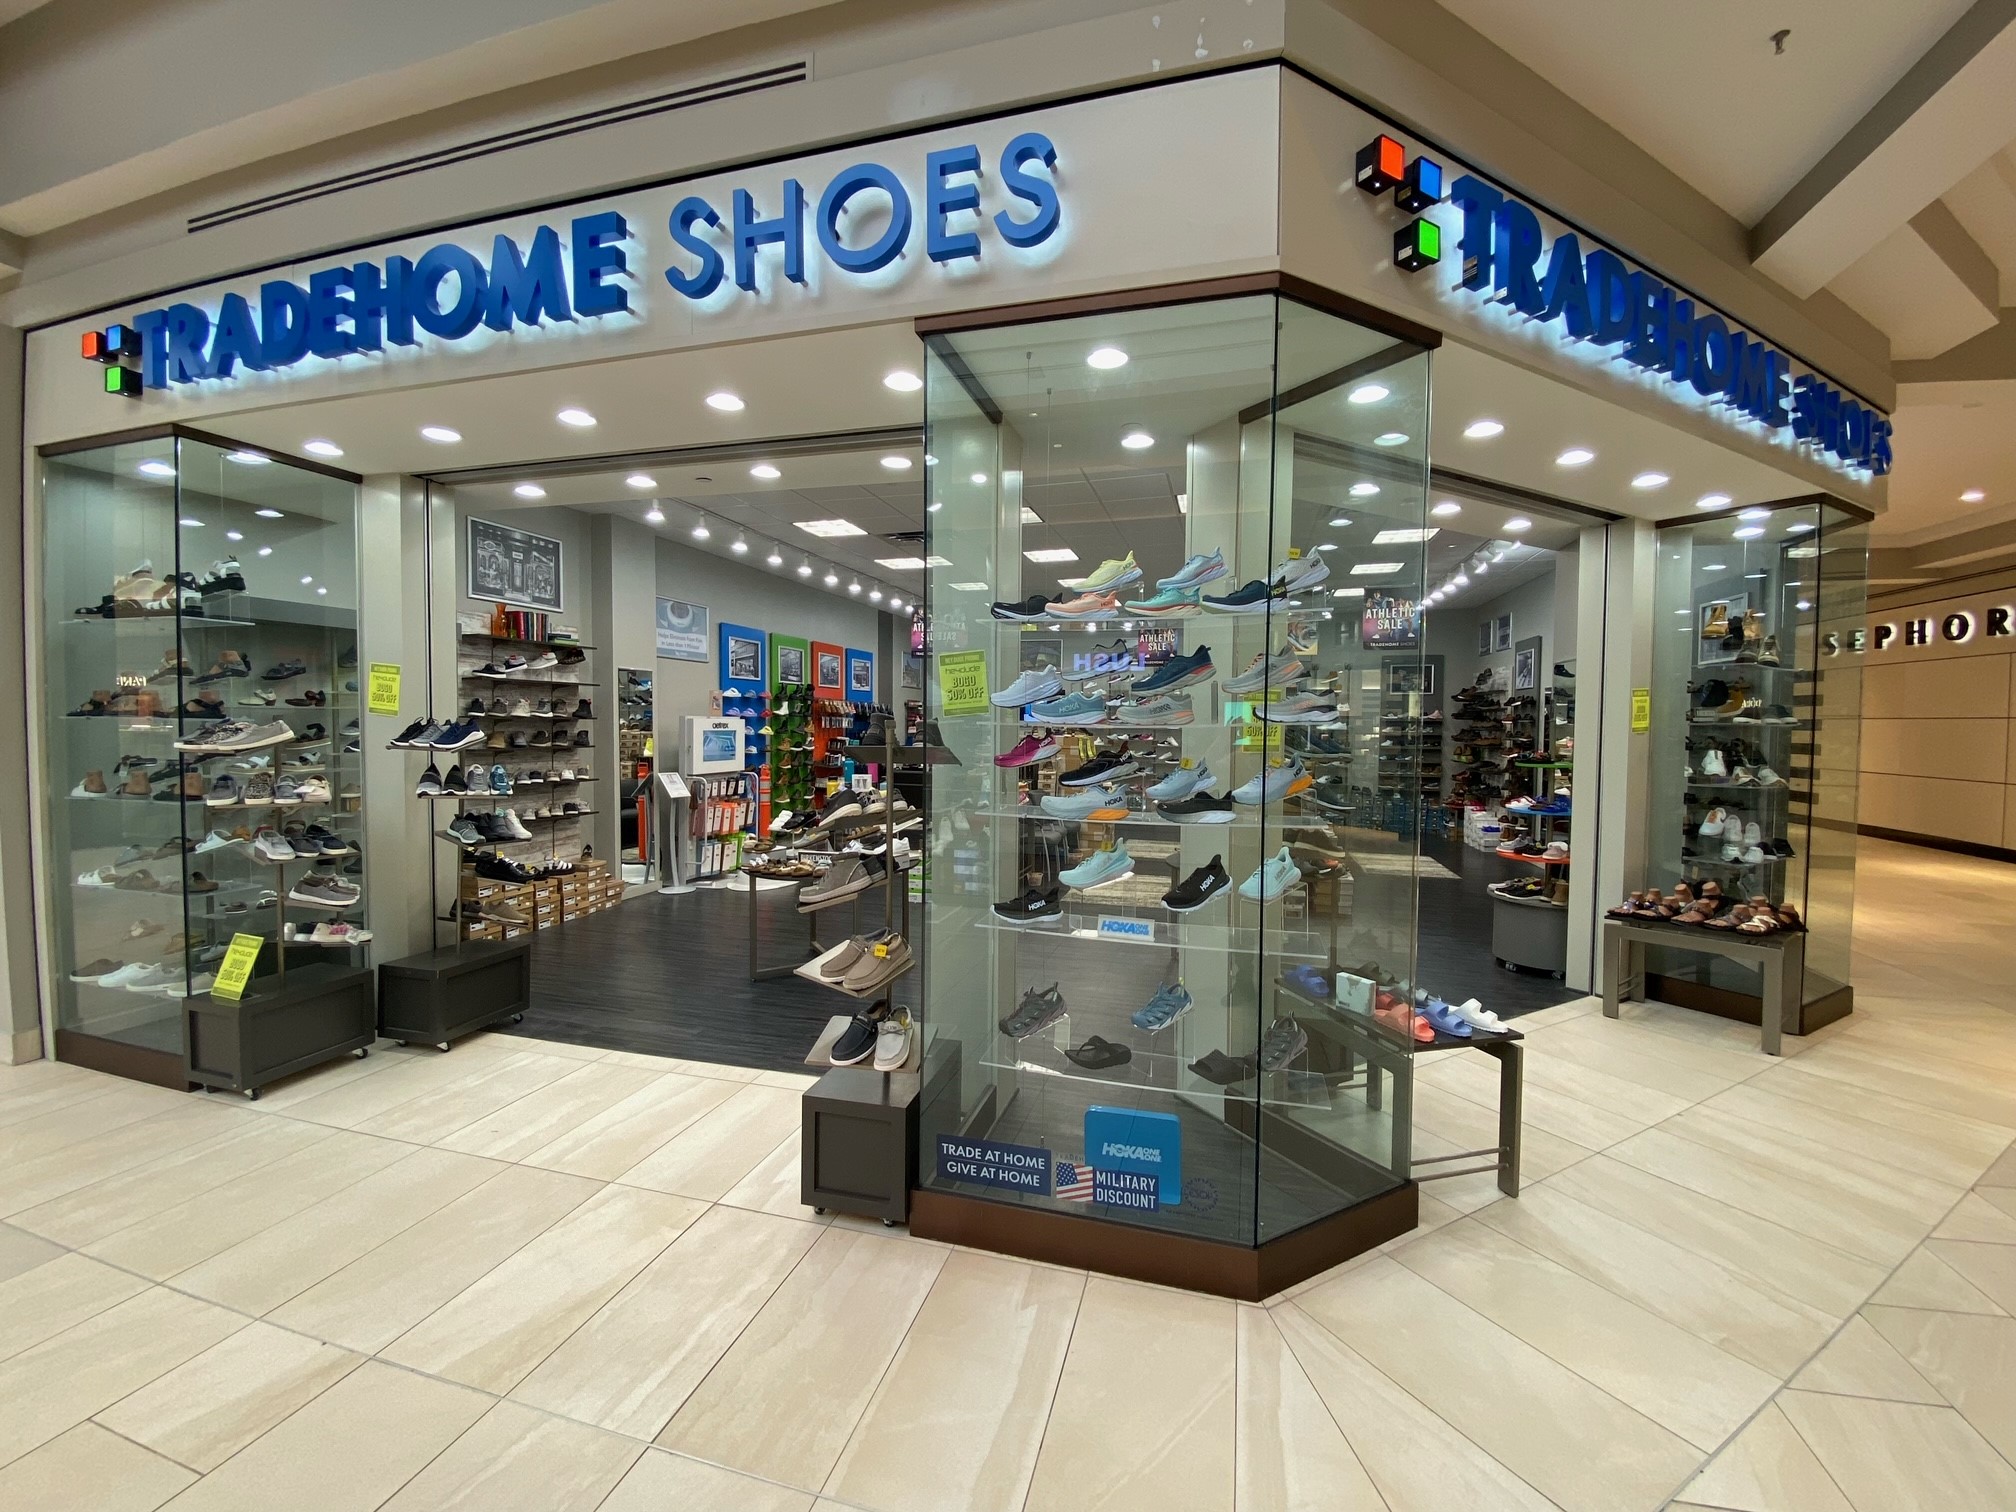 Tradehome Shoes Rosedale